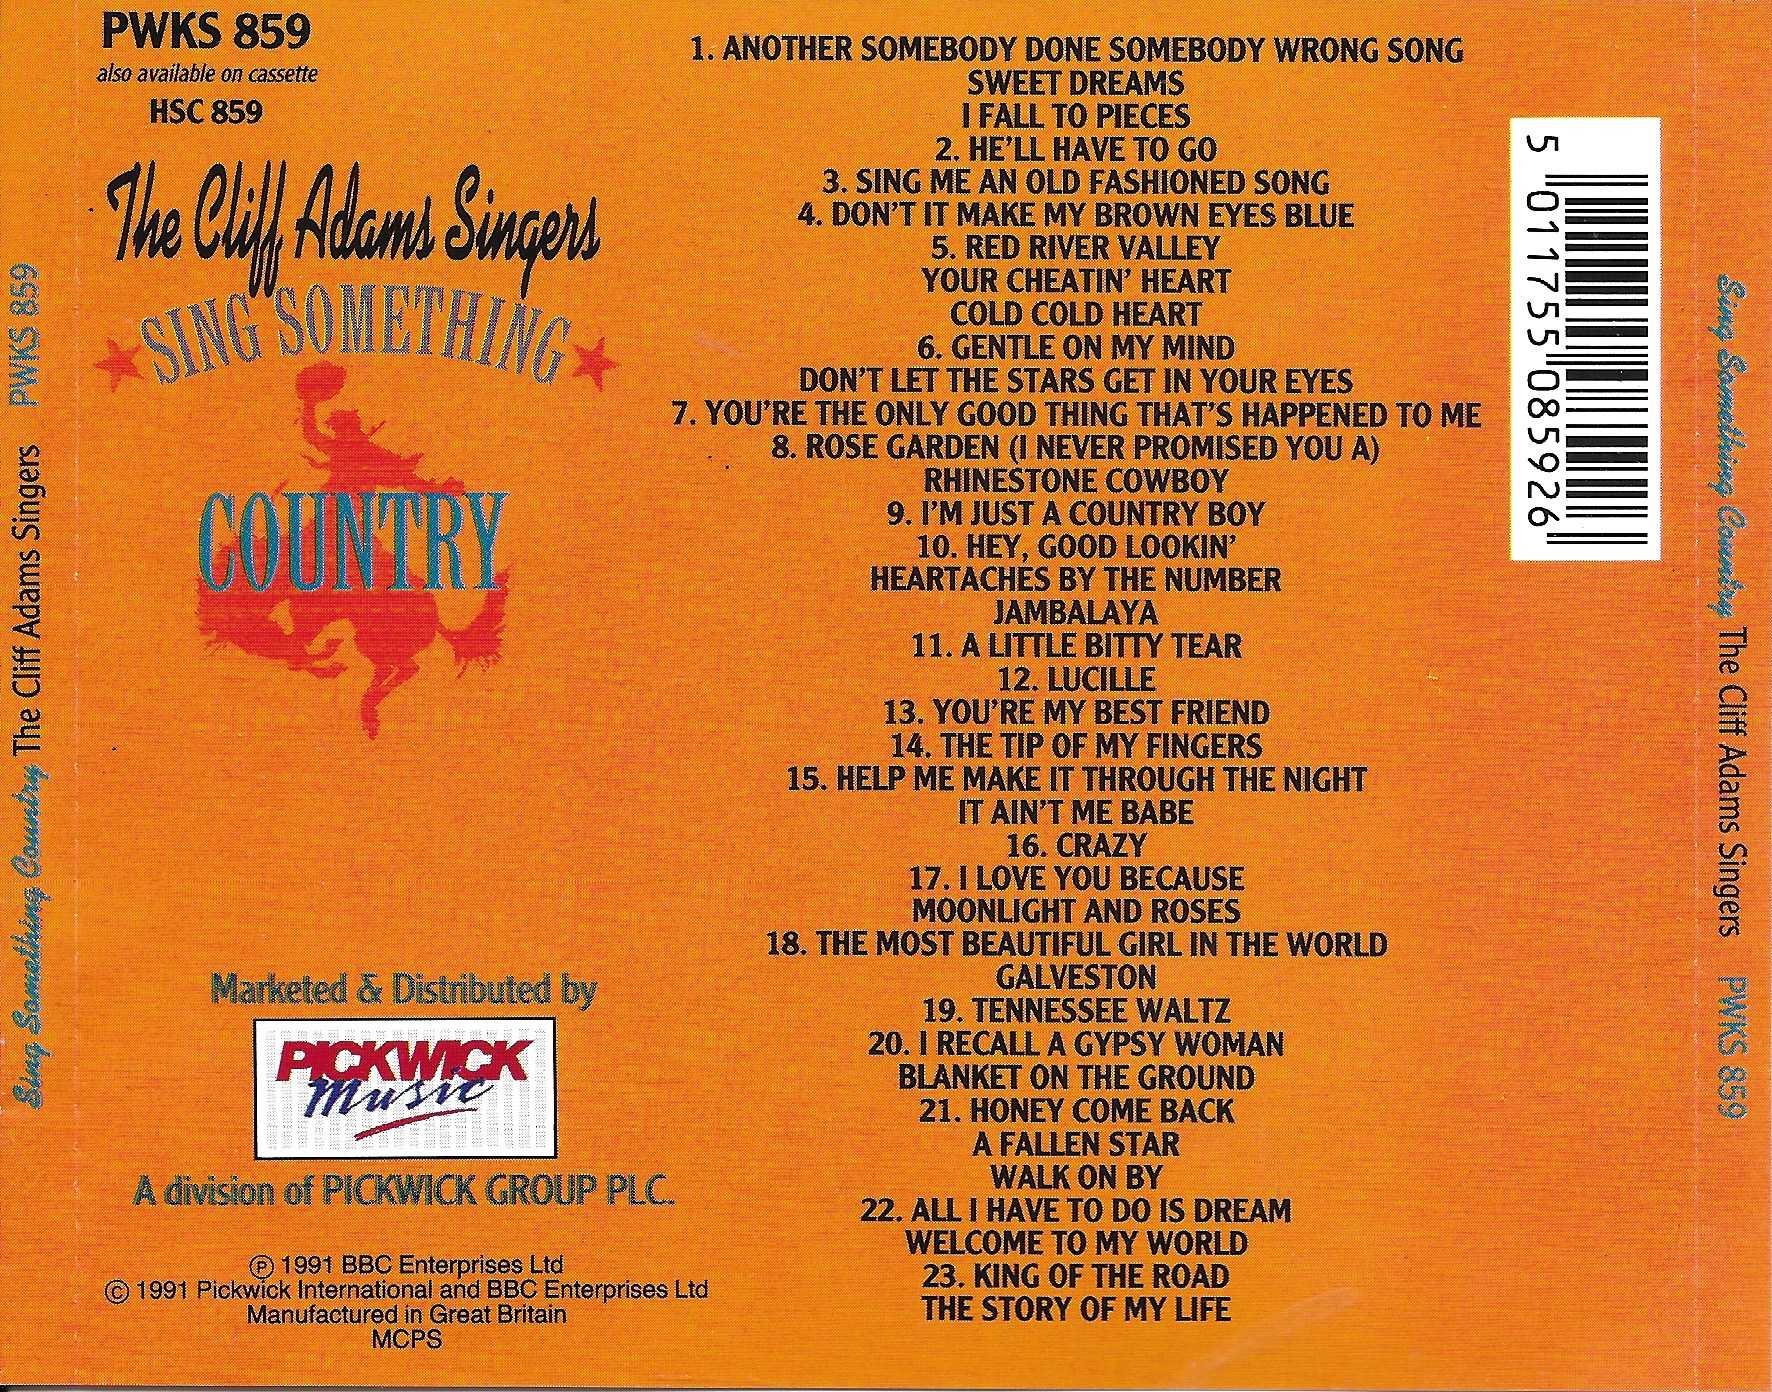 Picture of PWKS 859 Sing something country by artist Various from the BBC records and Tapes library